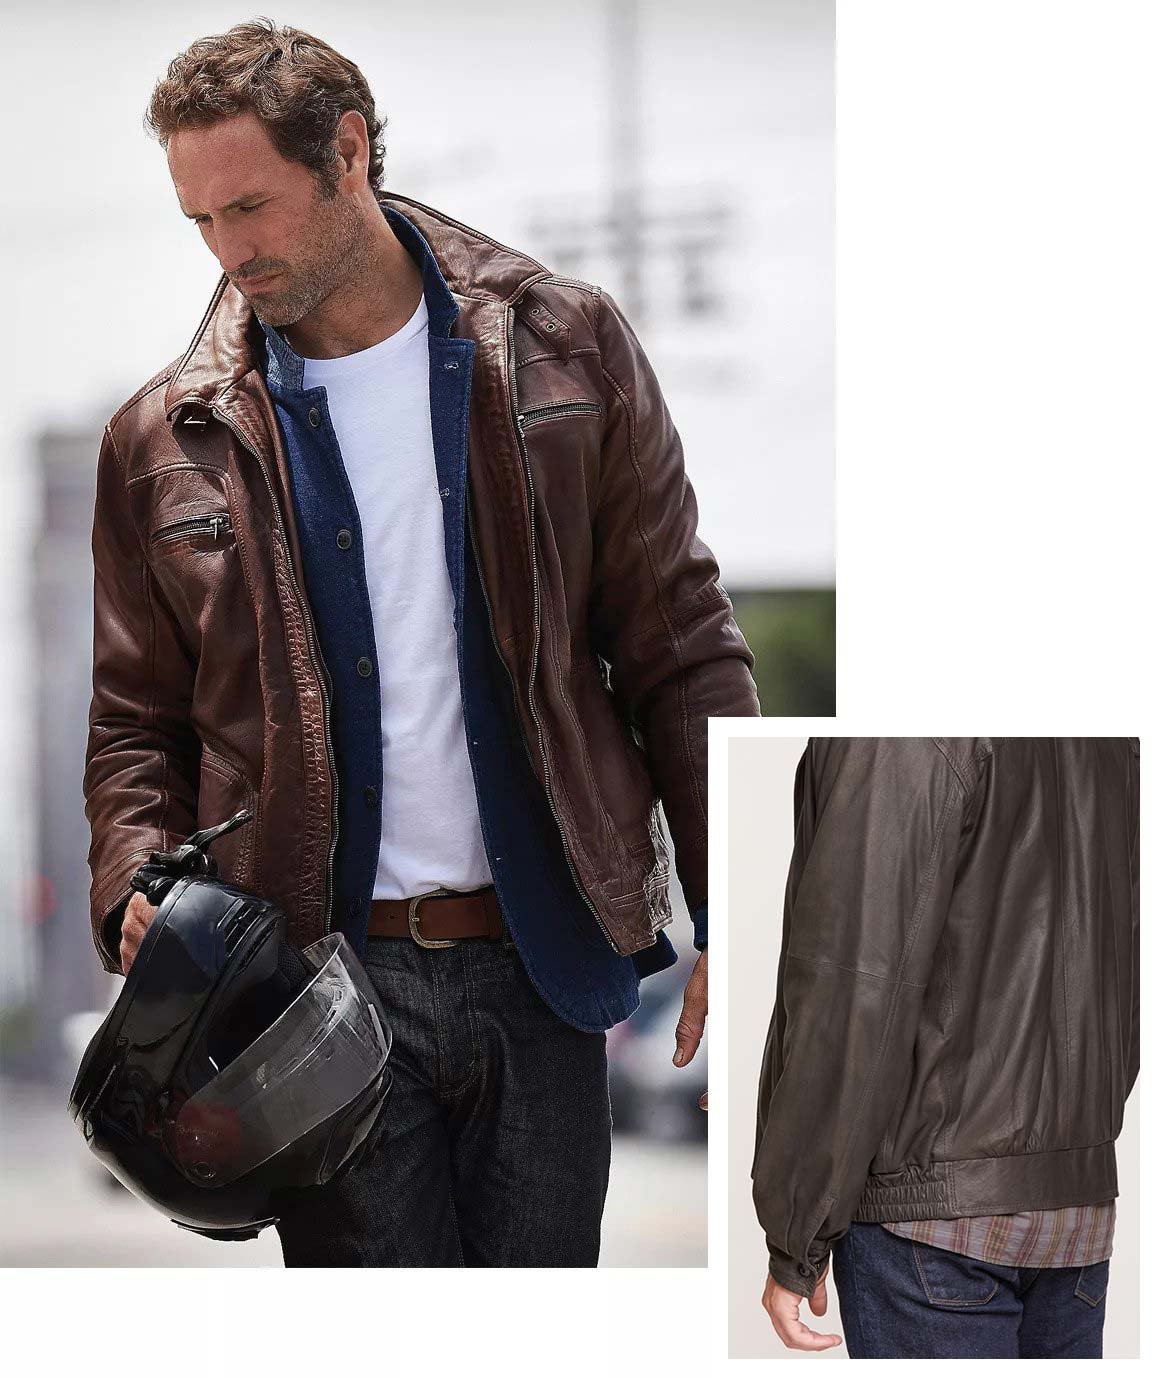 TOP ESSENTIAL GUIDELINES FOR BUYING A LEATHER JACKET